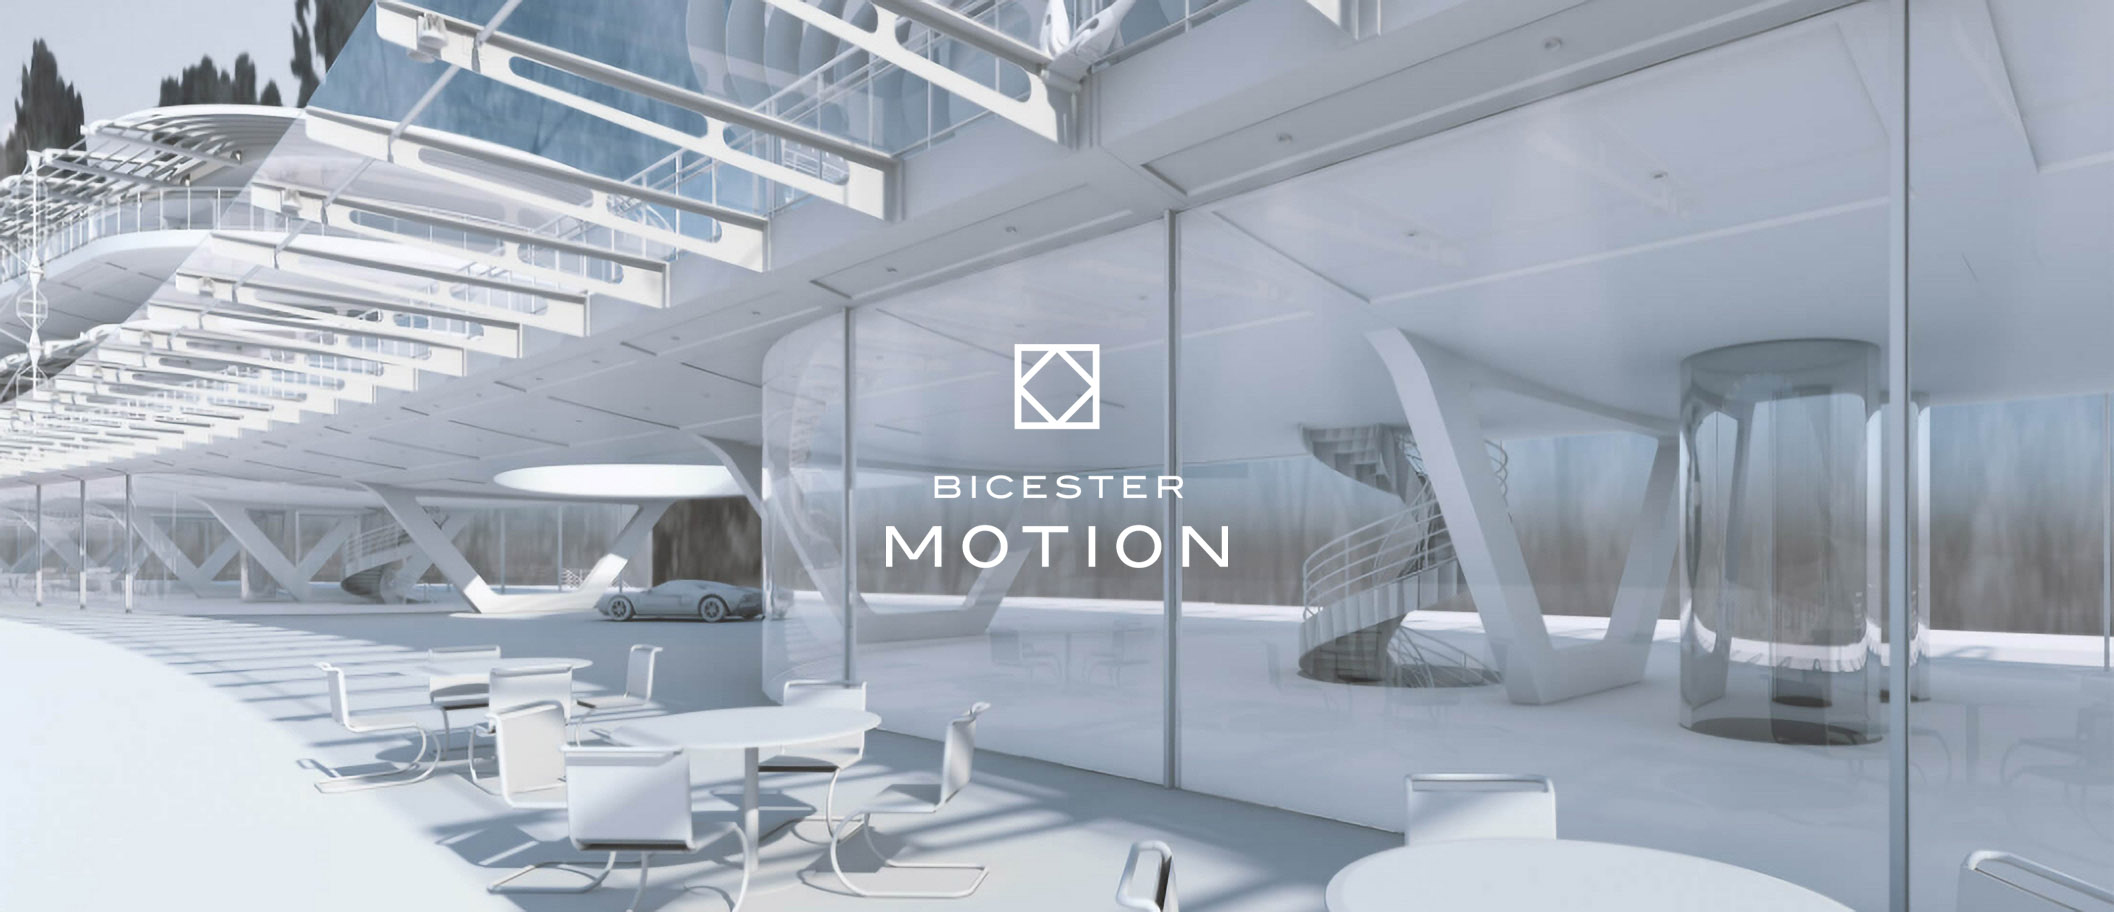 Bicester Motion logo on architectural 3D visual